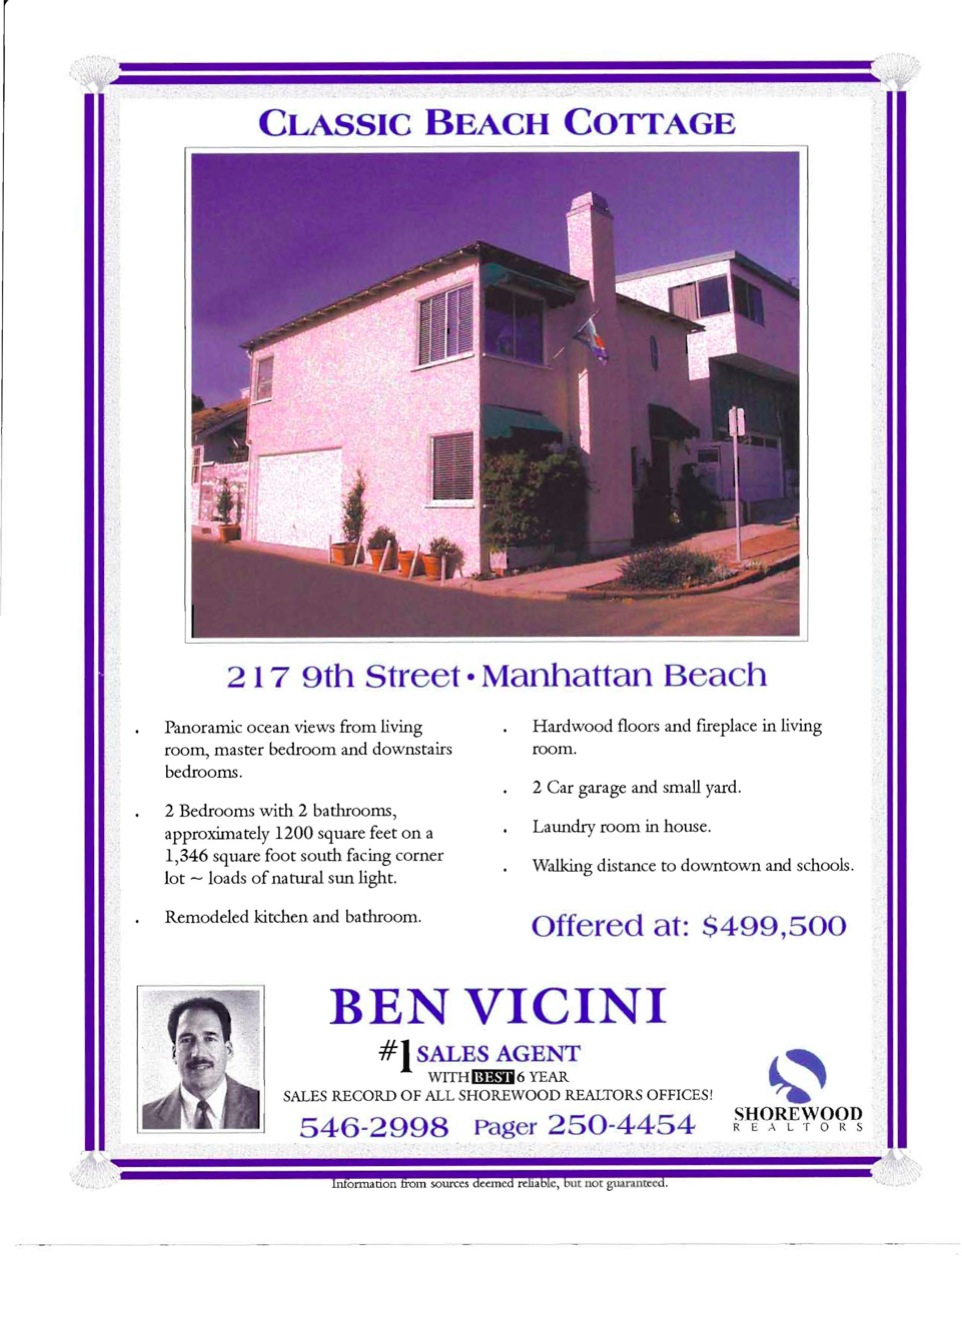 Vicini's Past Listings & Sales_Page_50